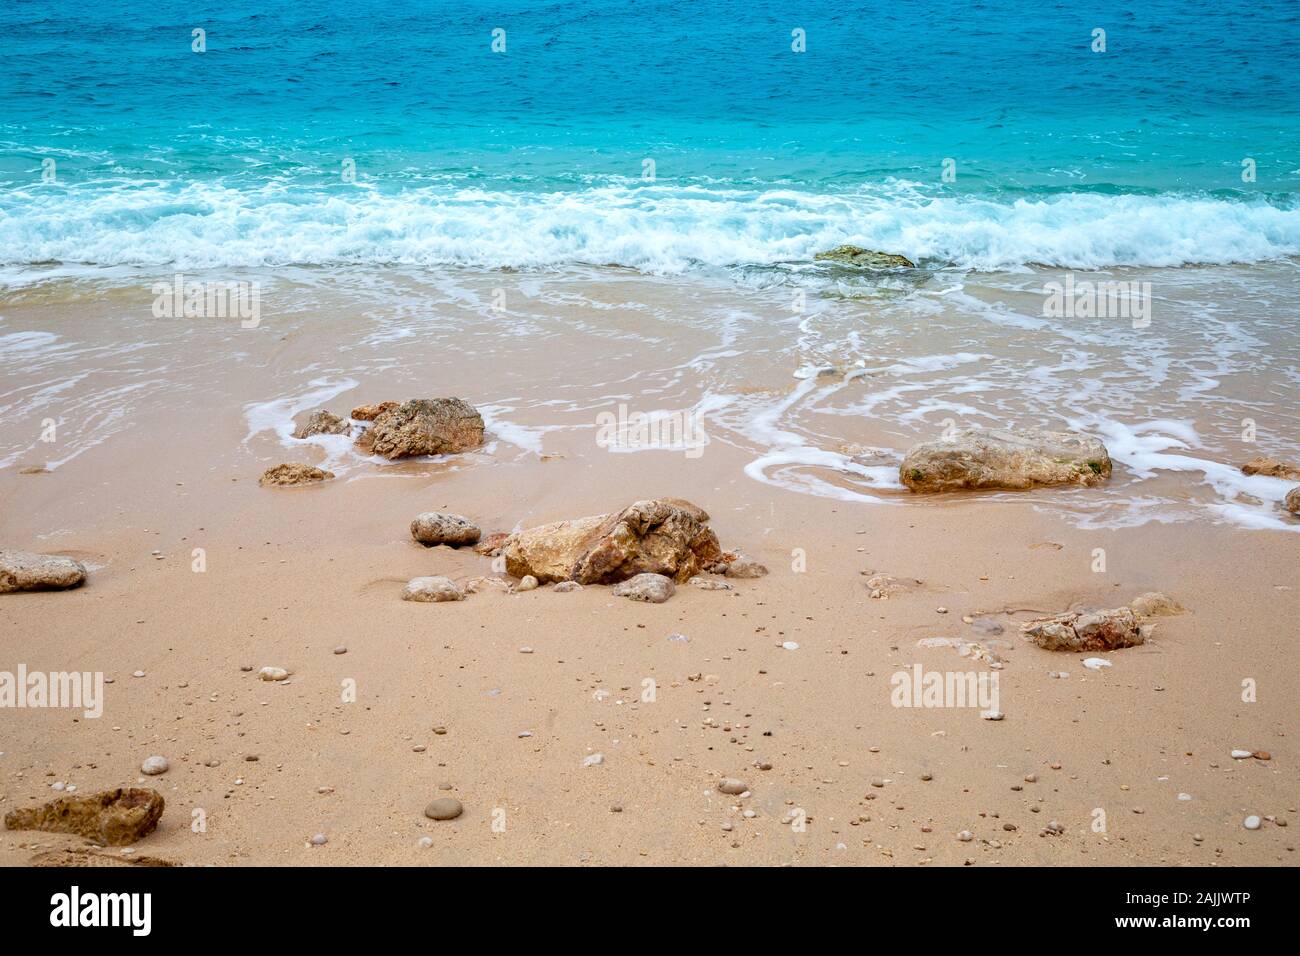 Turquoise colored sea and stones on beach. Stock Photo